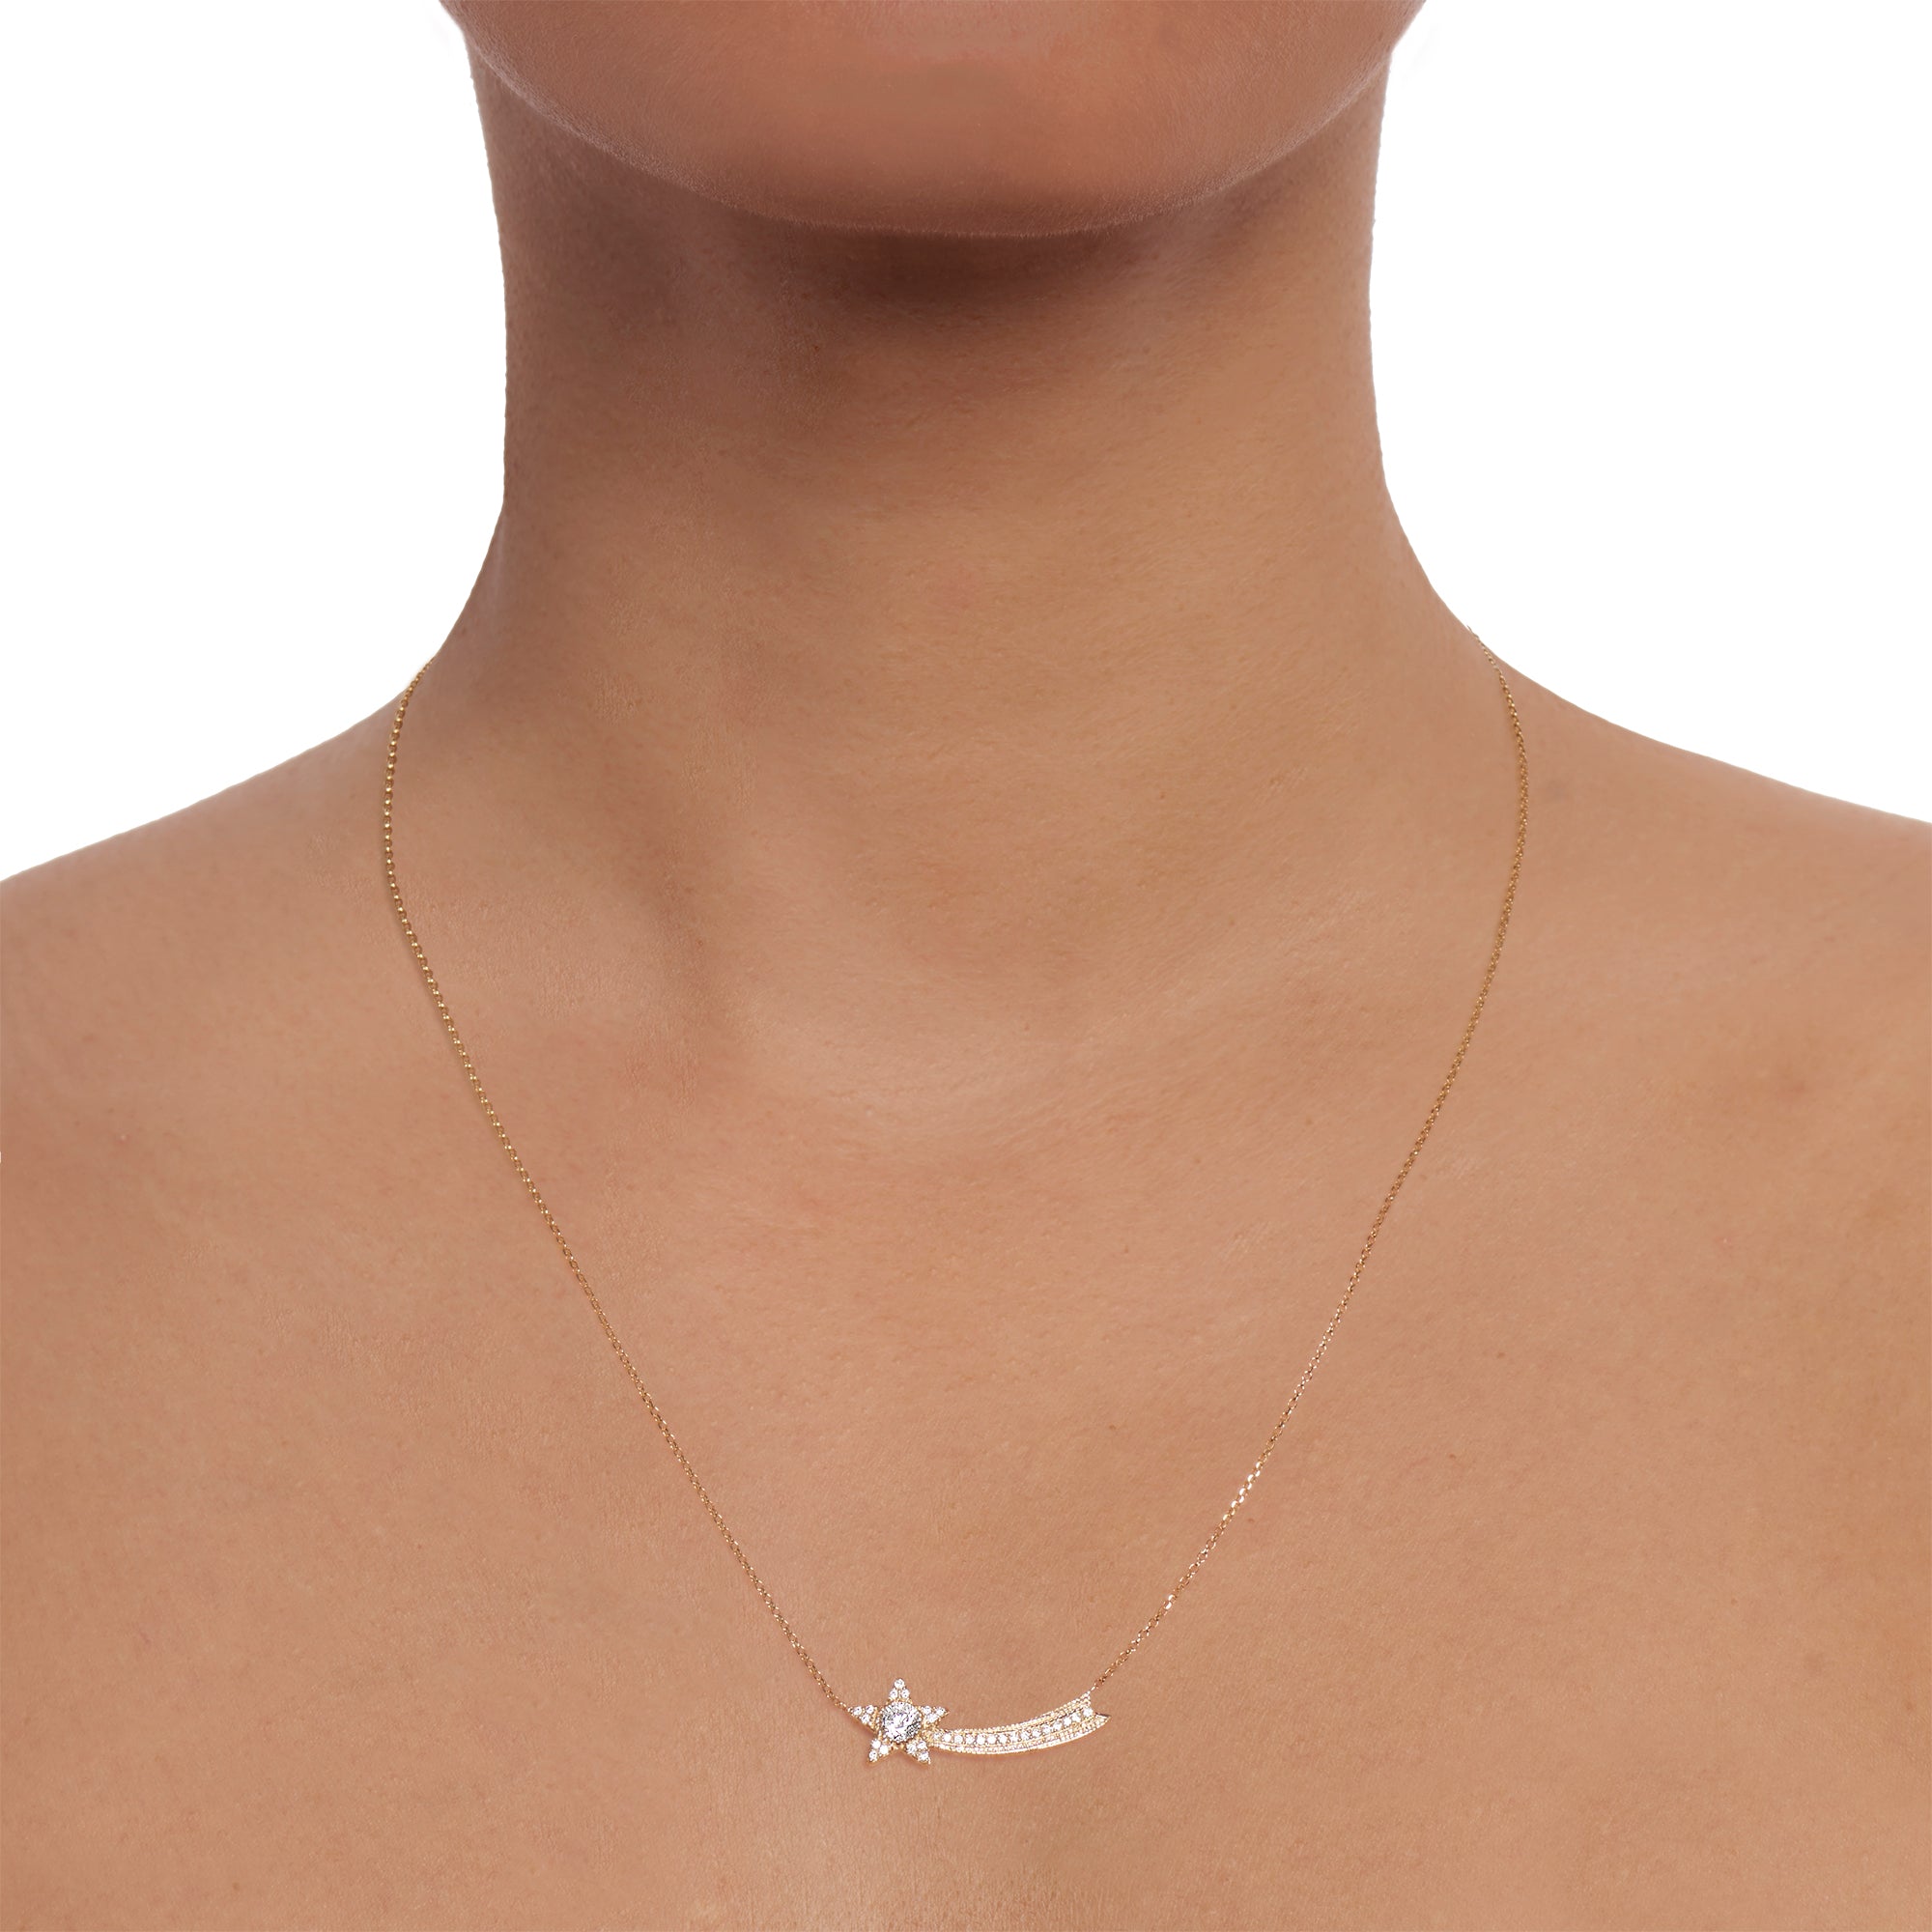 Diamond Shooting Star Necklace - Charlie and Marcelle